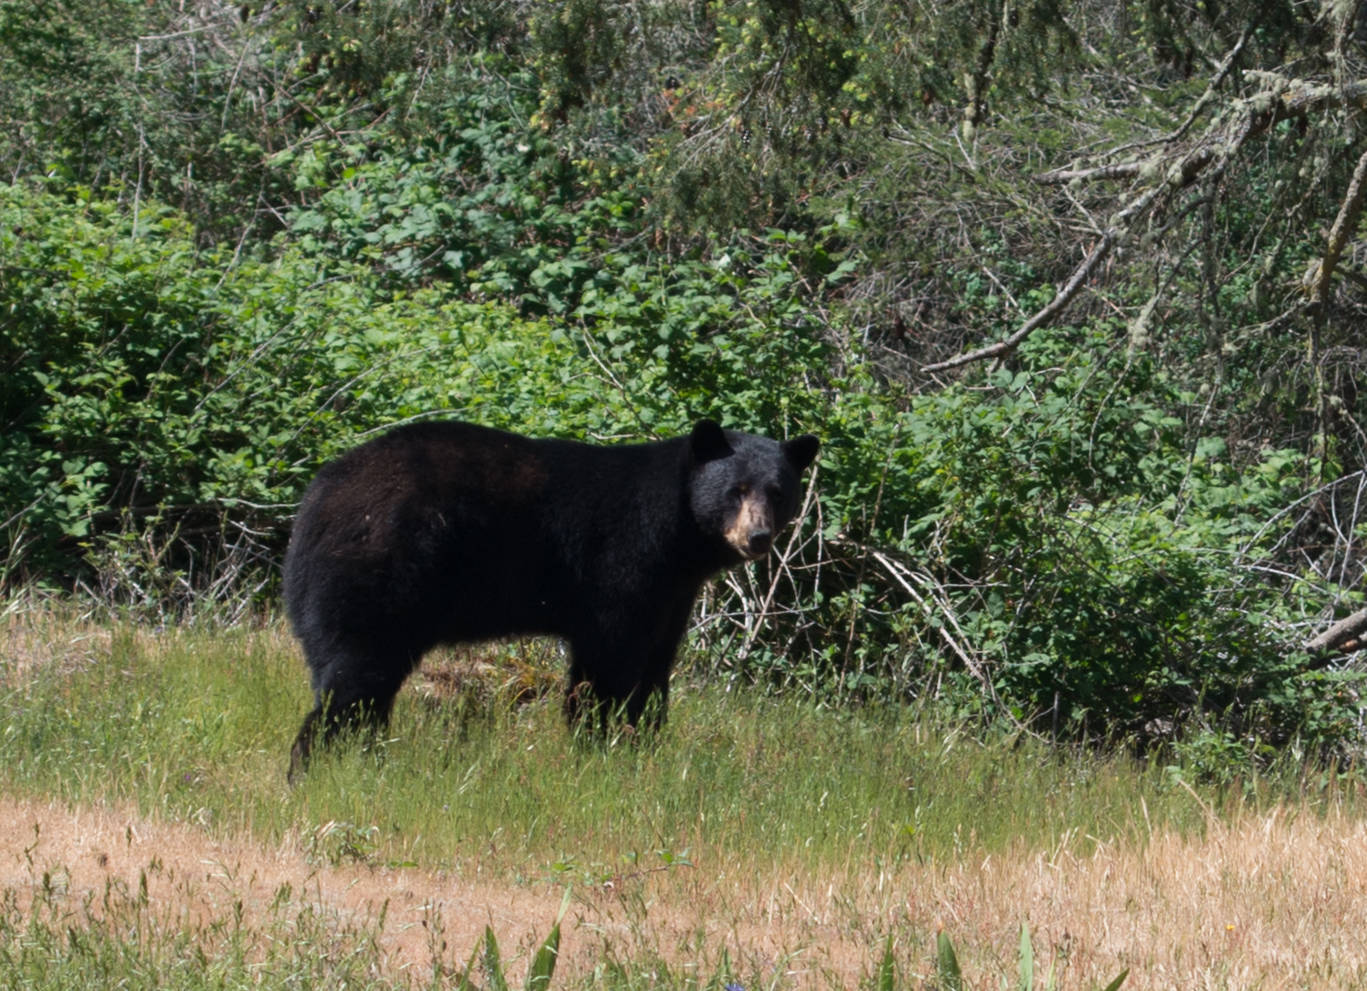 Richard Bell photographed the bear in his backyard on May 18 in Hillview Terrace near Friday Harbor. (Richard Bell/contributed photo)